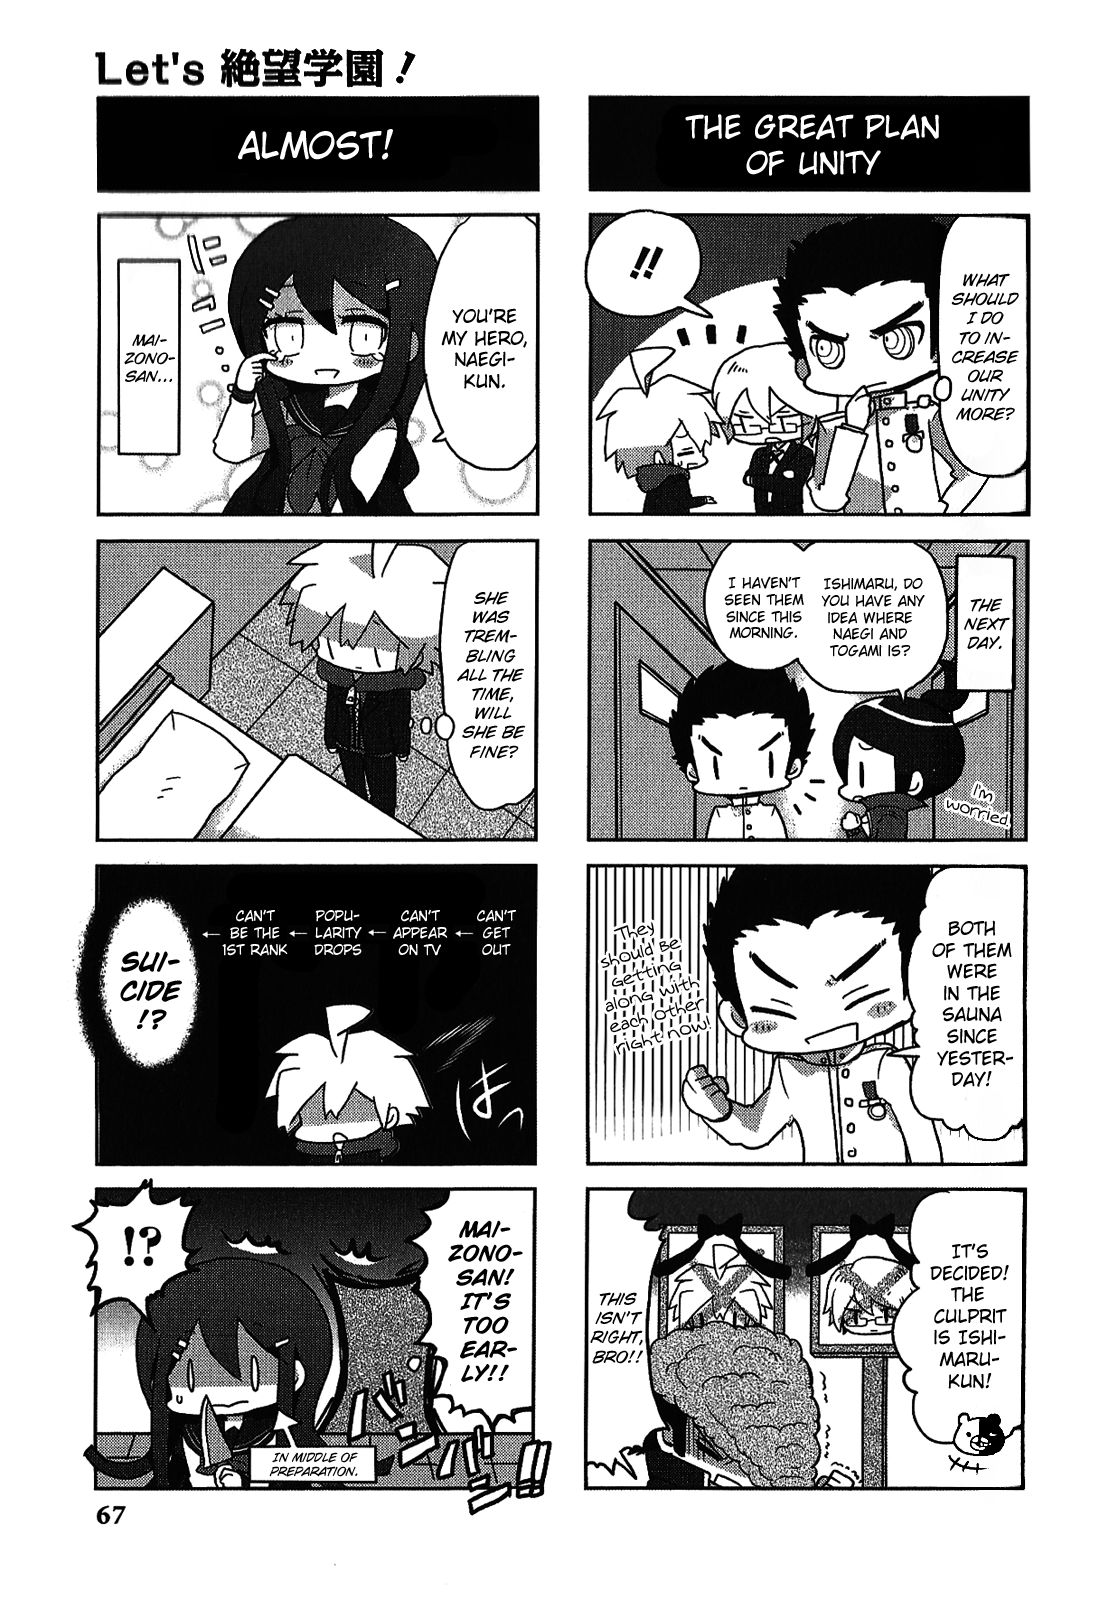 Danganronpa - The Academy of Hope and the High School Students of Despair 4-koma Kings - chapter 11 - #2